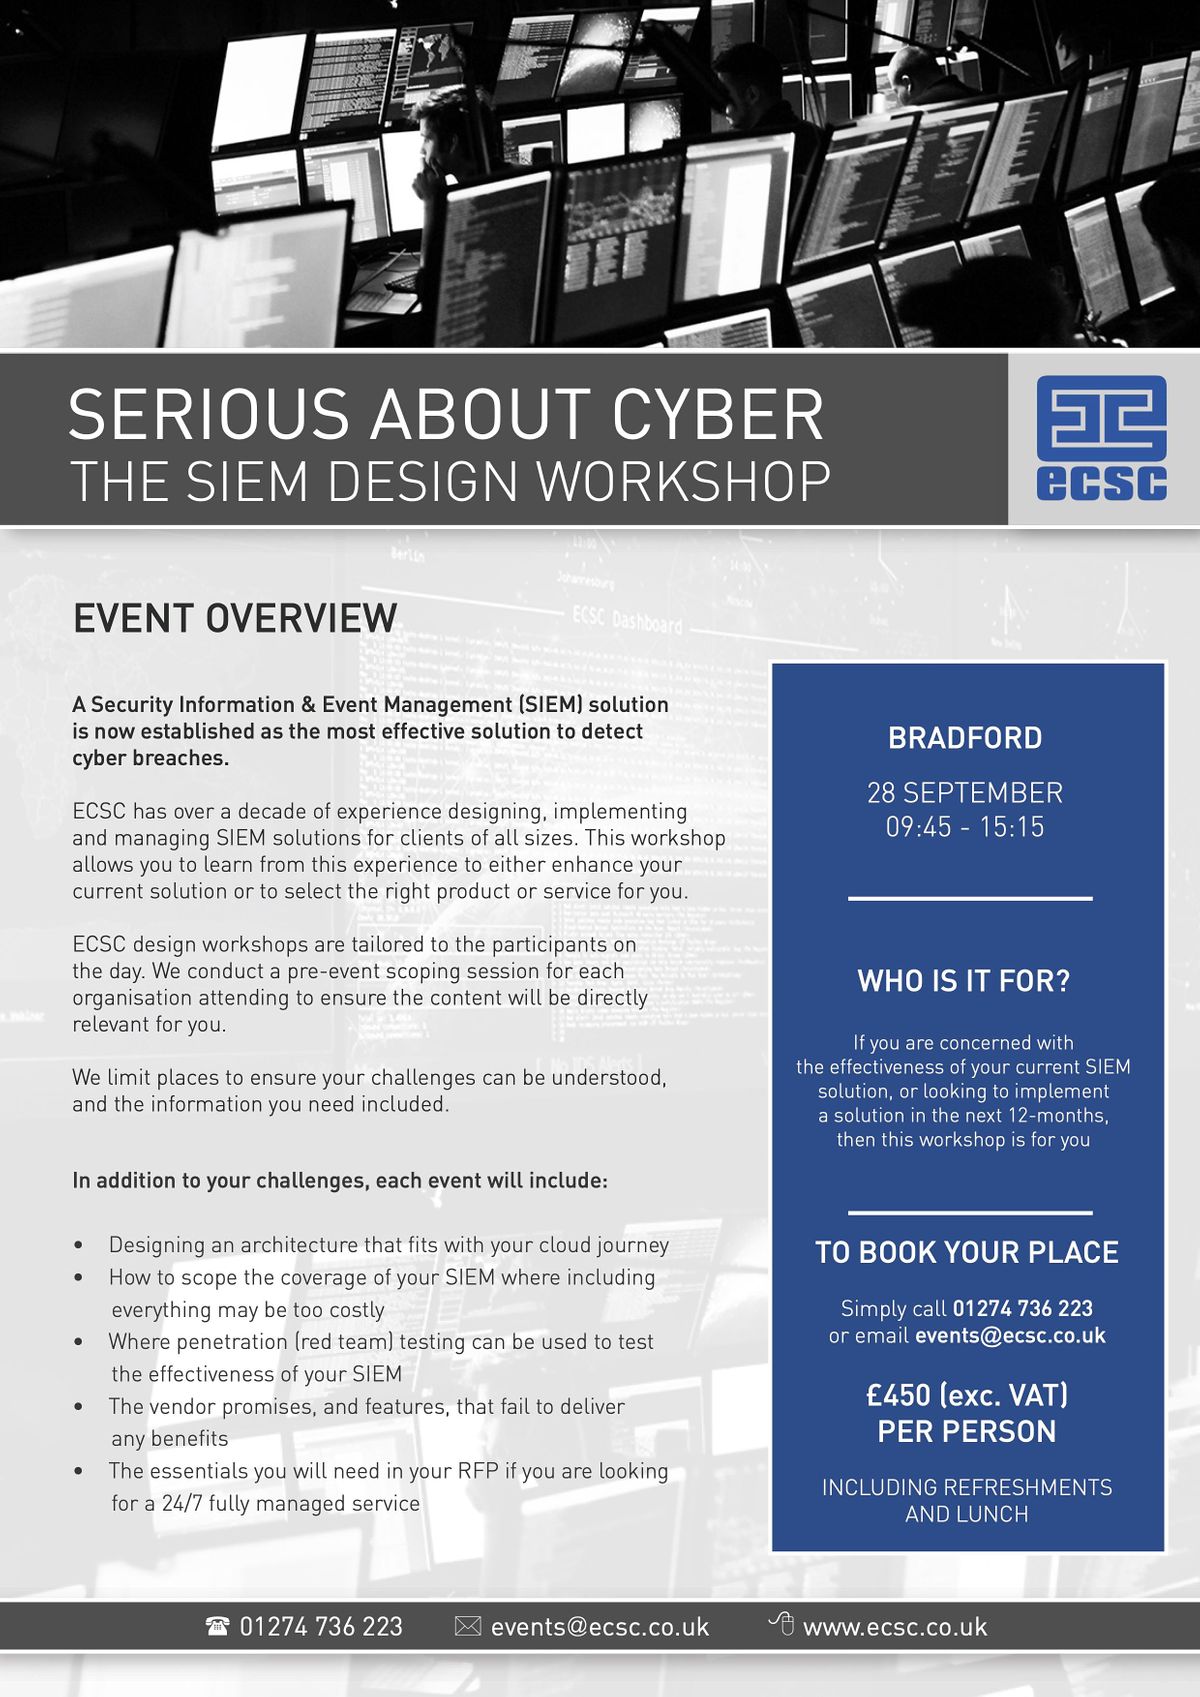 SERIOUS ABOUT CYBER - THE SIEM DESIGN WORKSHOP